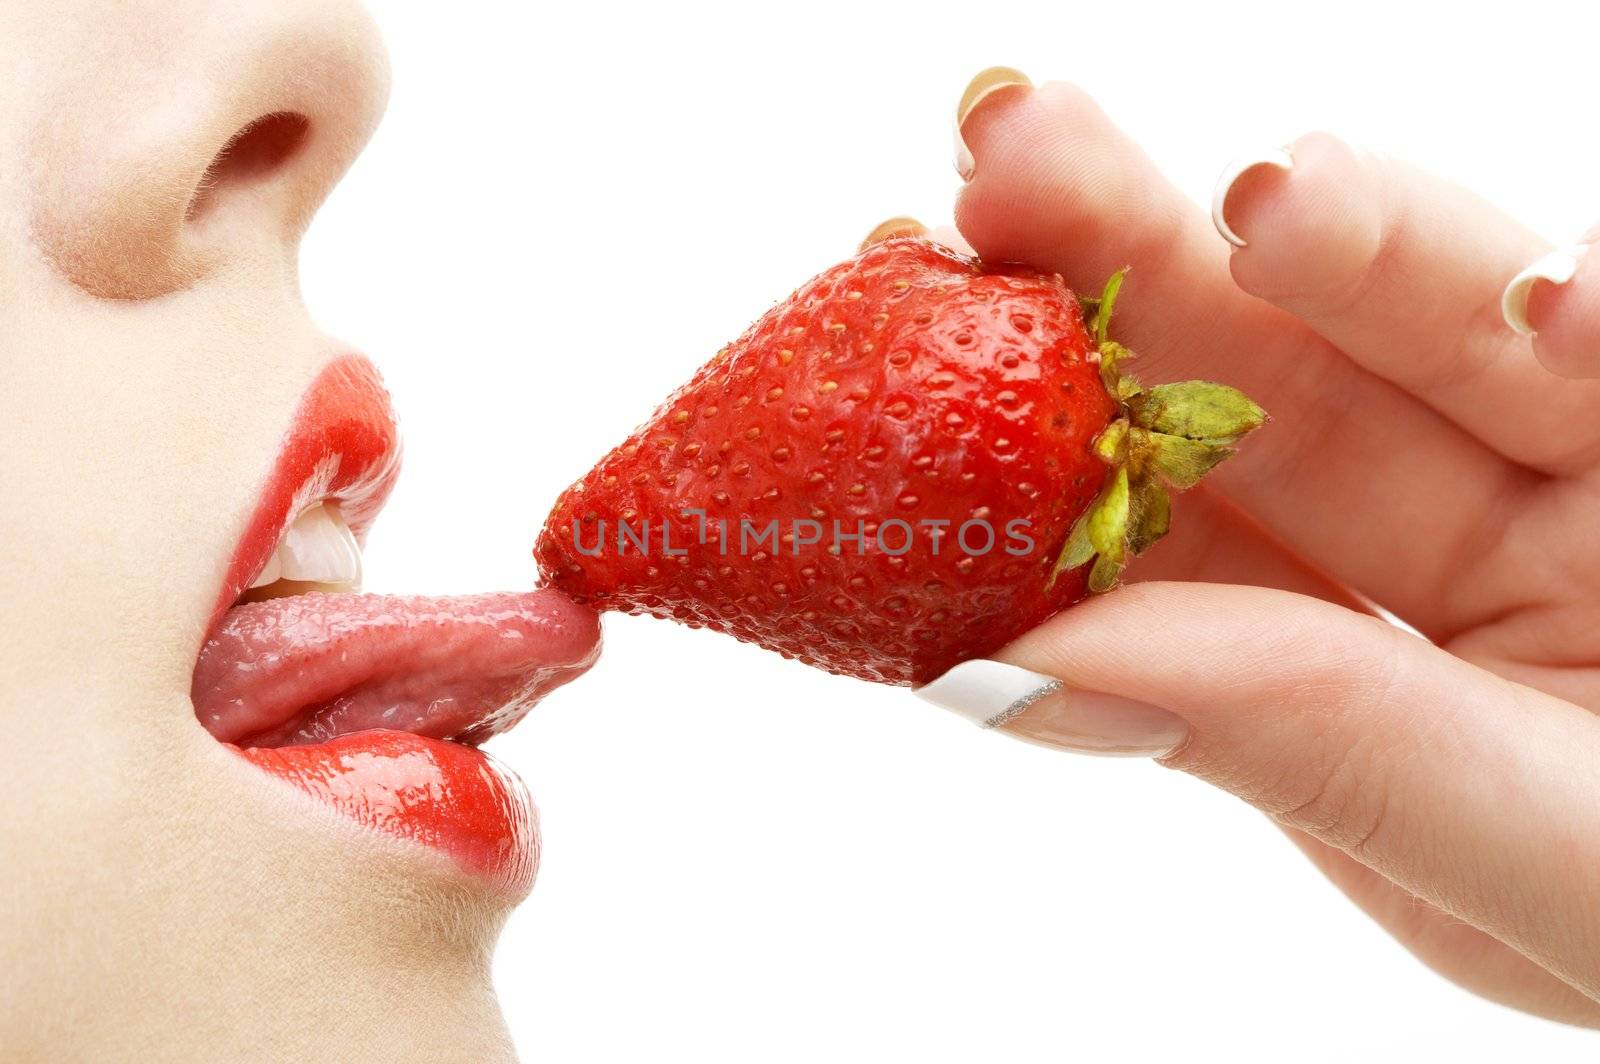 picture of strawberry, lips and tongue over white